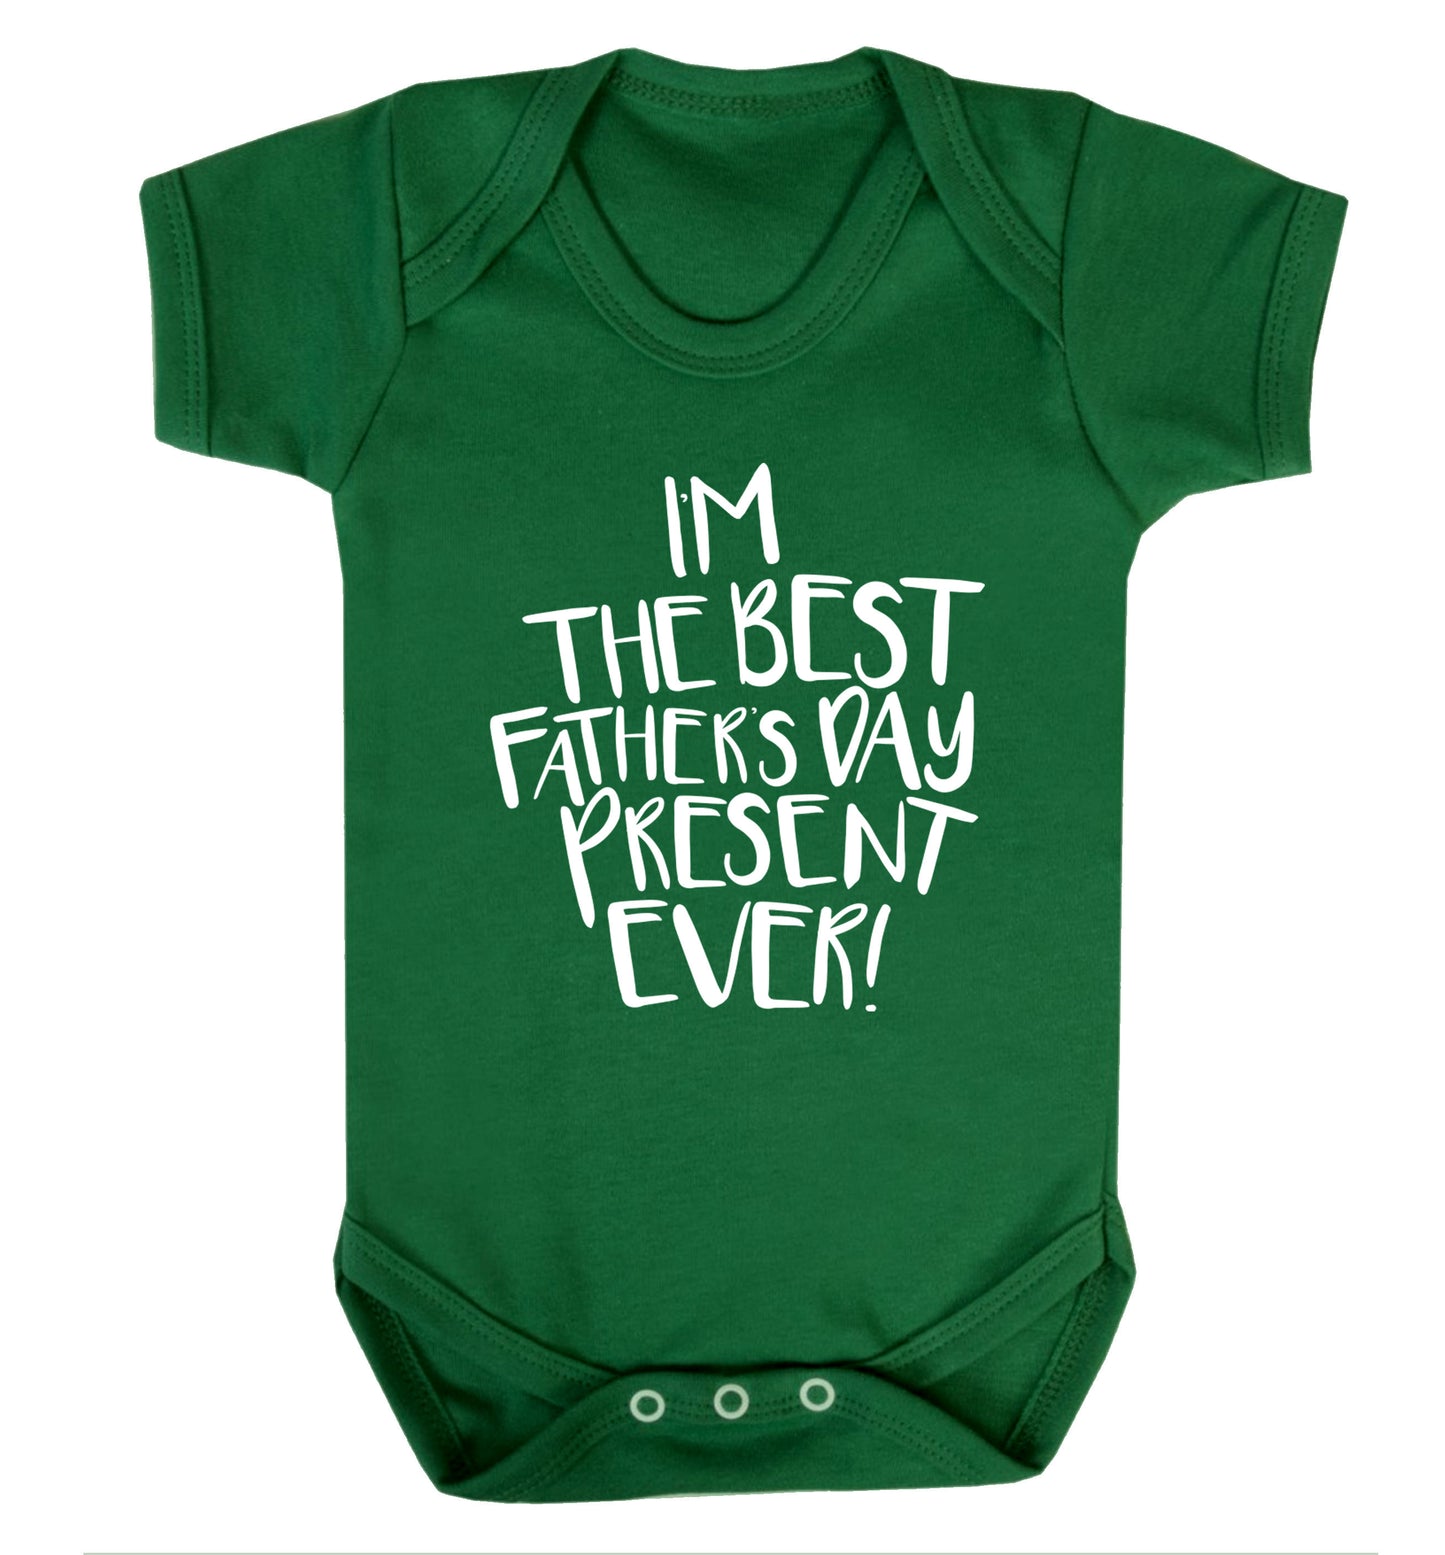 I'm the best father's day present ever! Baby Vest green 18-24 months